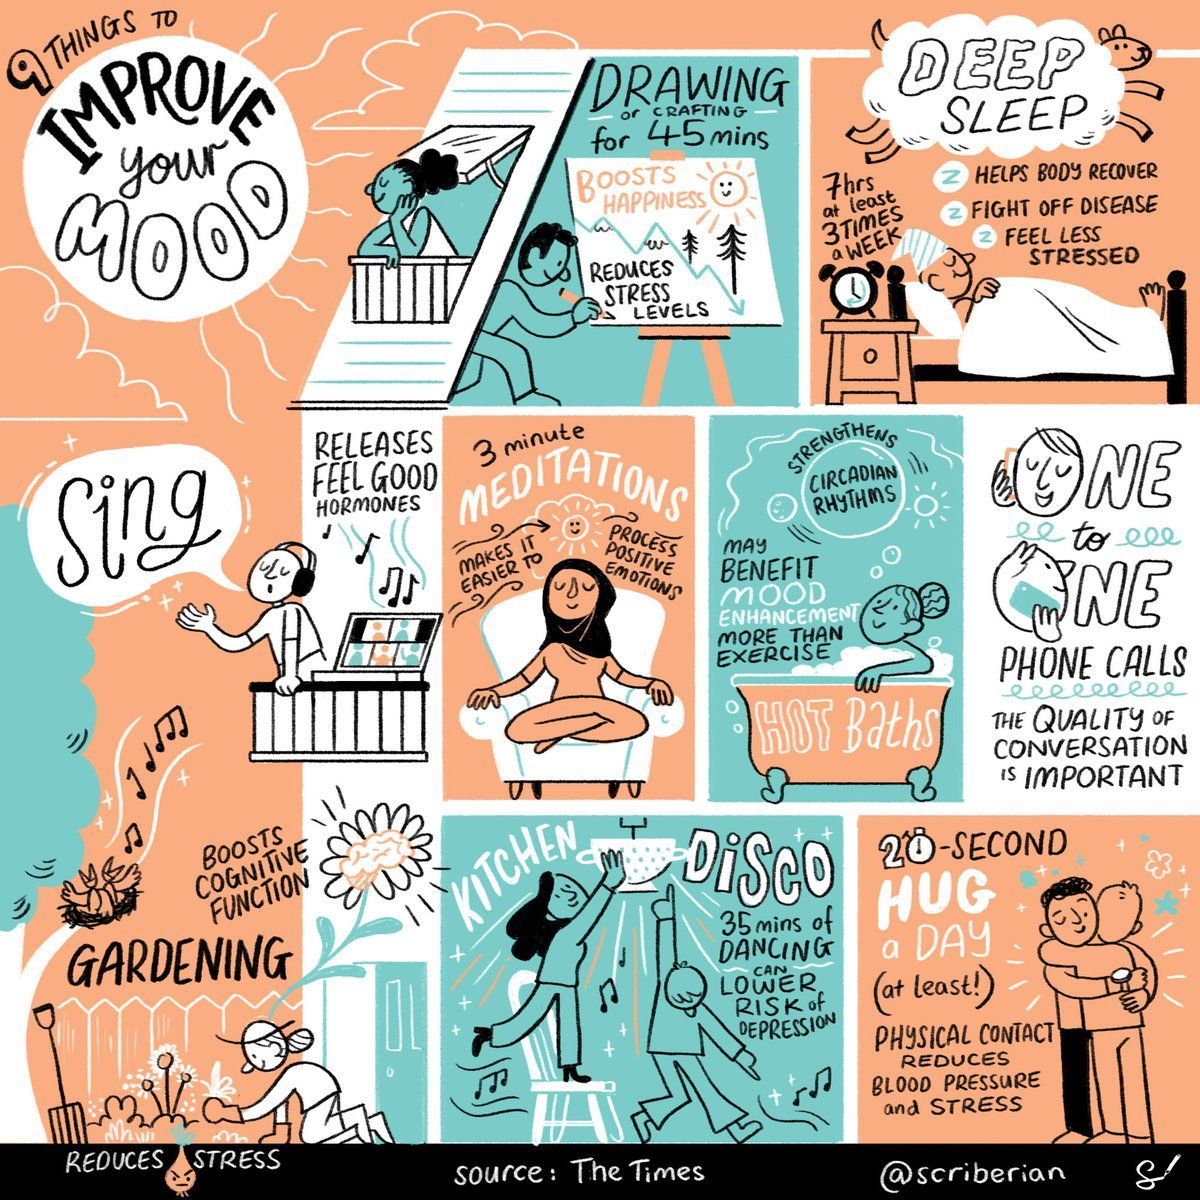 Needing a mood boost? Here are some fab tips from our ‘sketch-pert’ friends at @scriberian! 😀
#moodboost #wellbeing